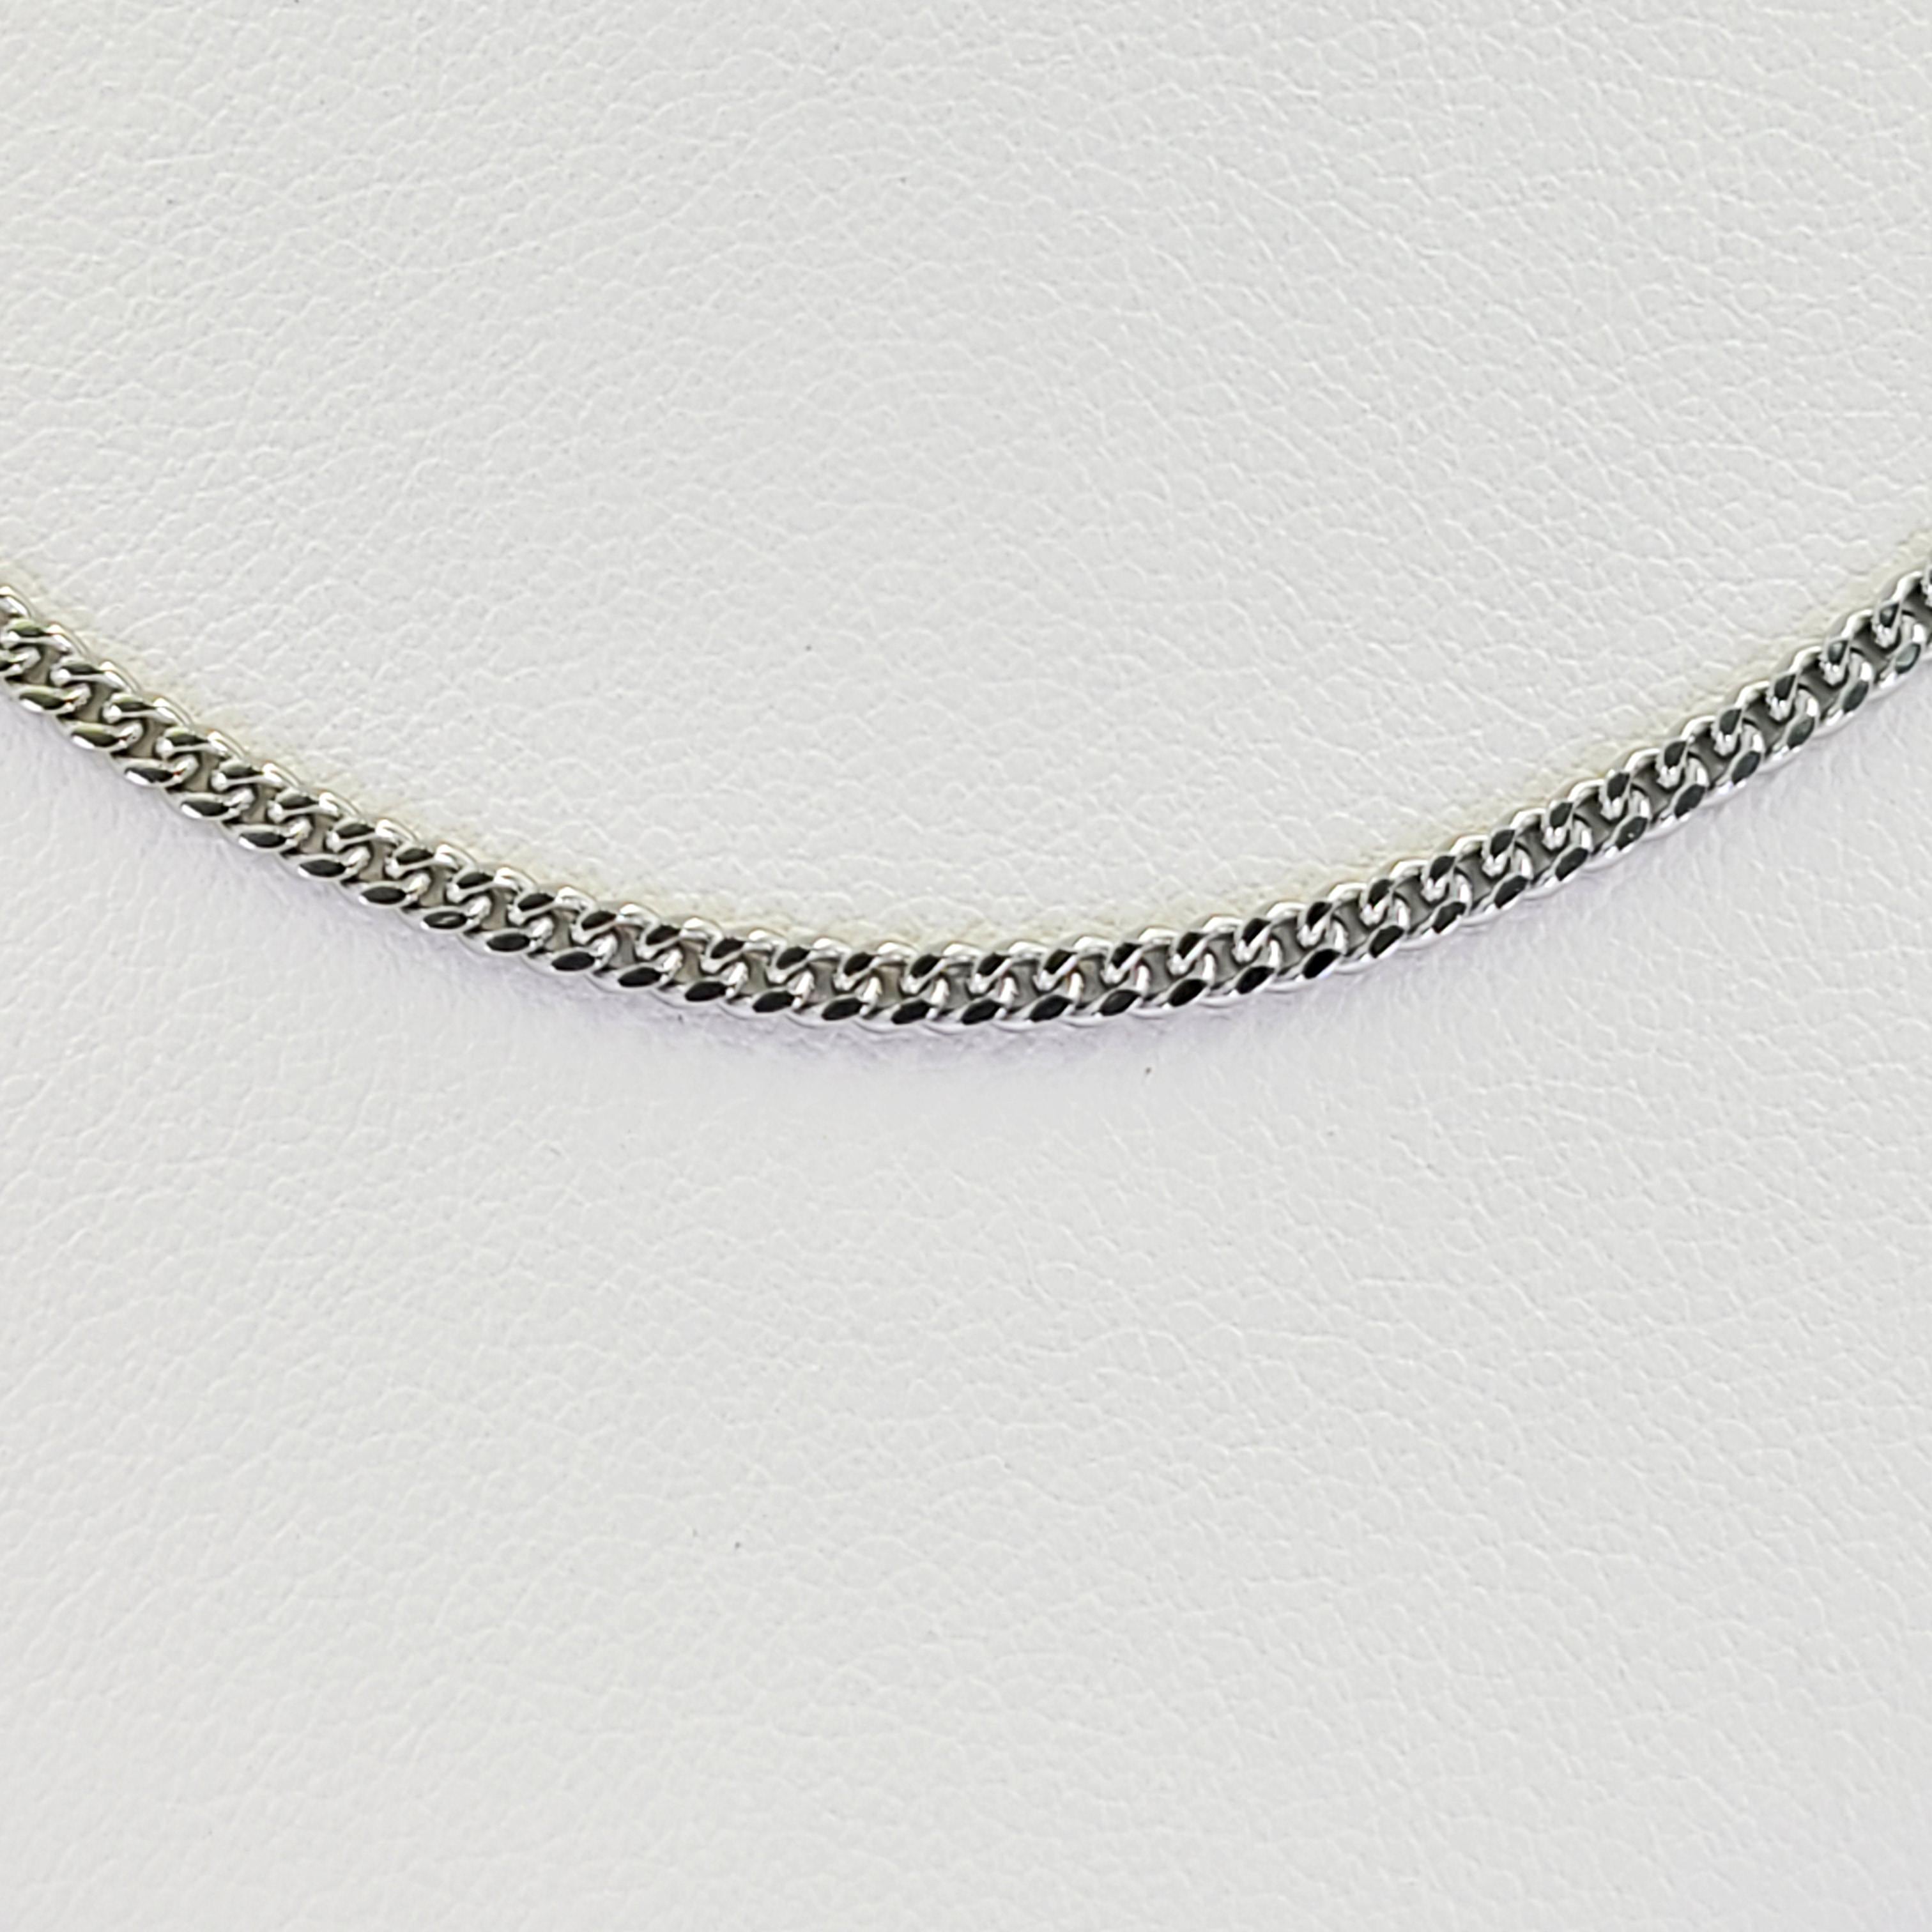 14 Karat White Gold 2mm Curb Link Chain Measuring 20 Inches Long With Lobster Clasp. Finished Weight Is 7.5 Grams.